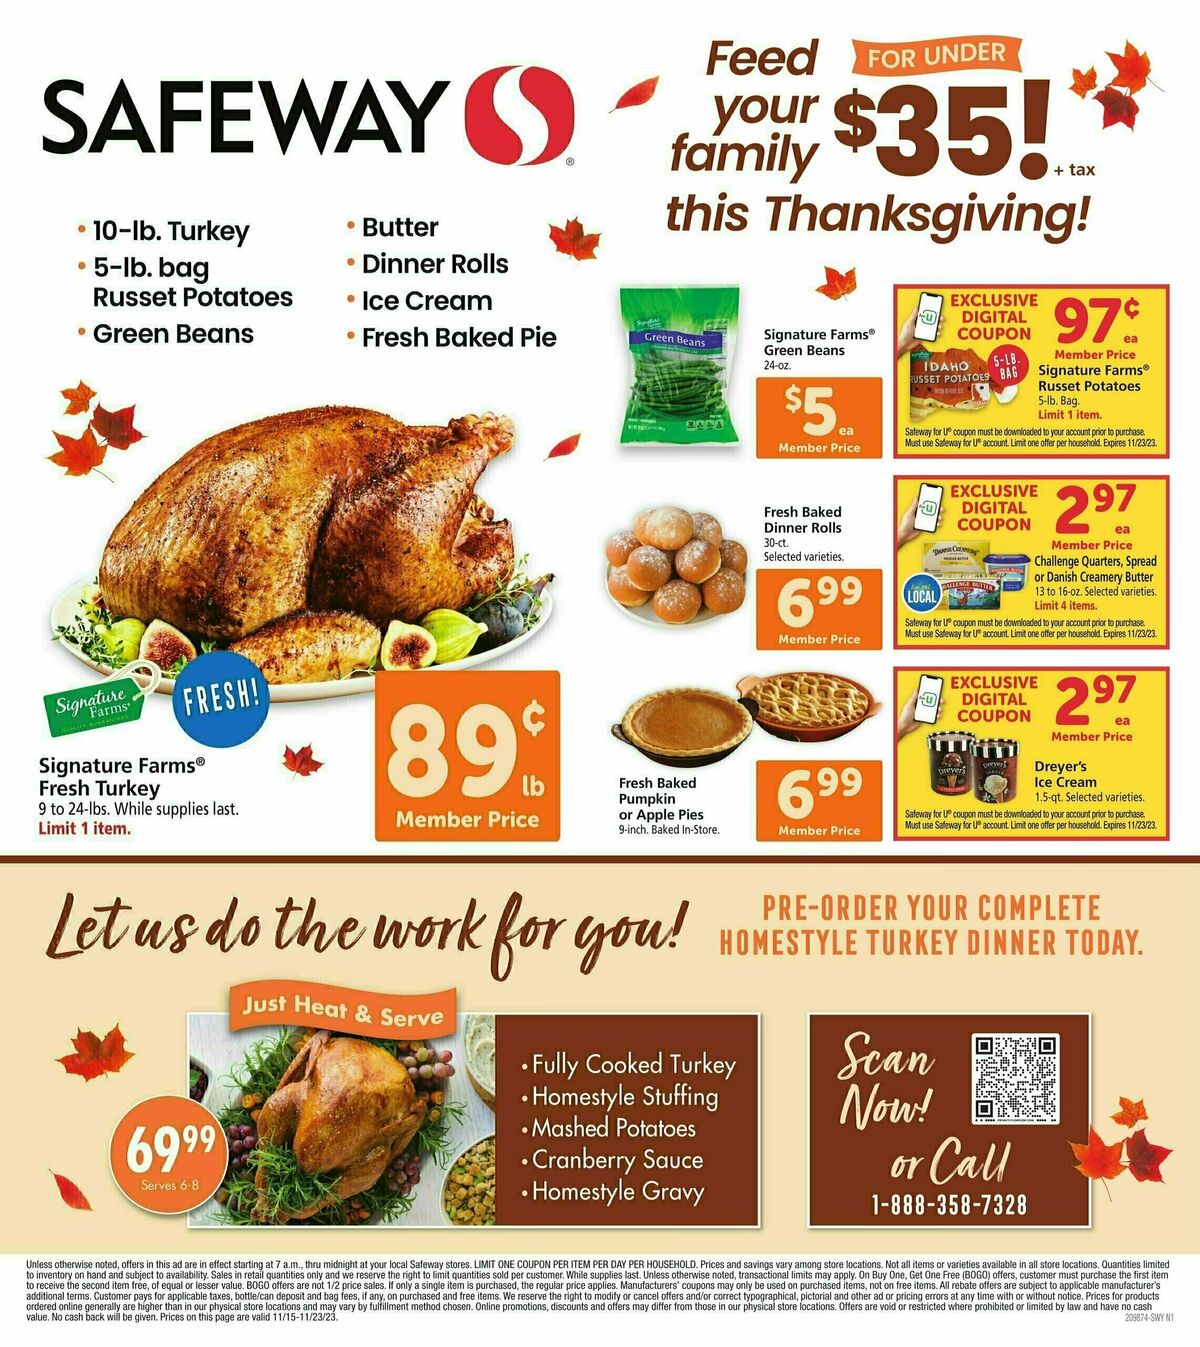 Safeway Specialty Publication Weekly Ad from November 15